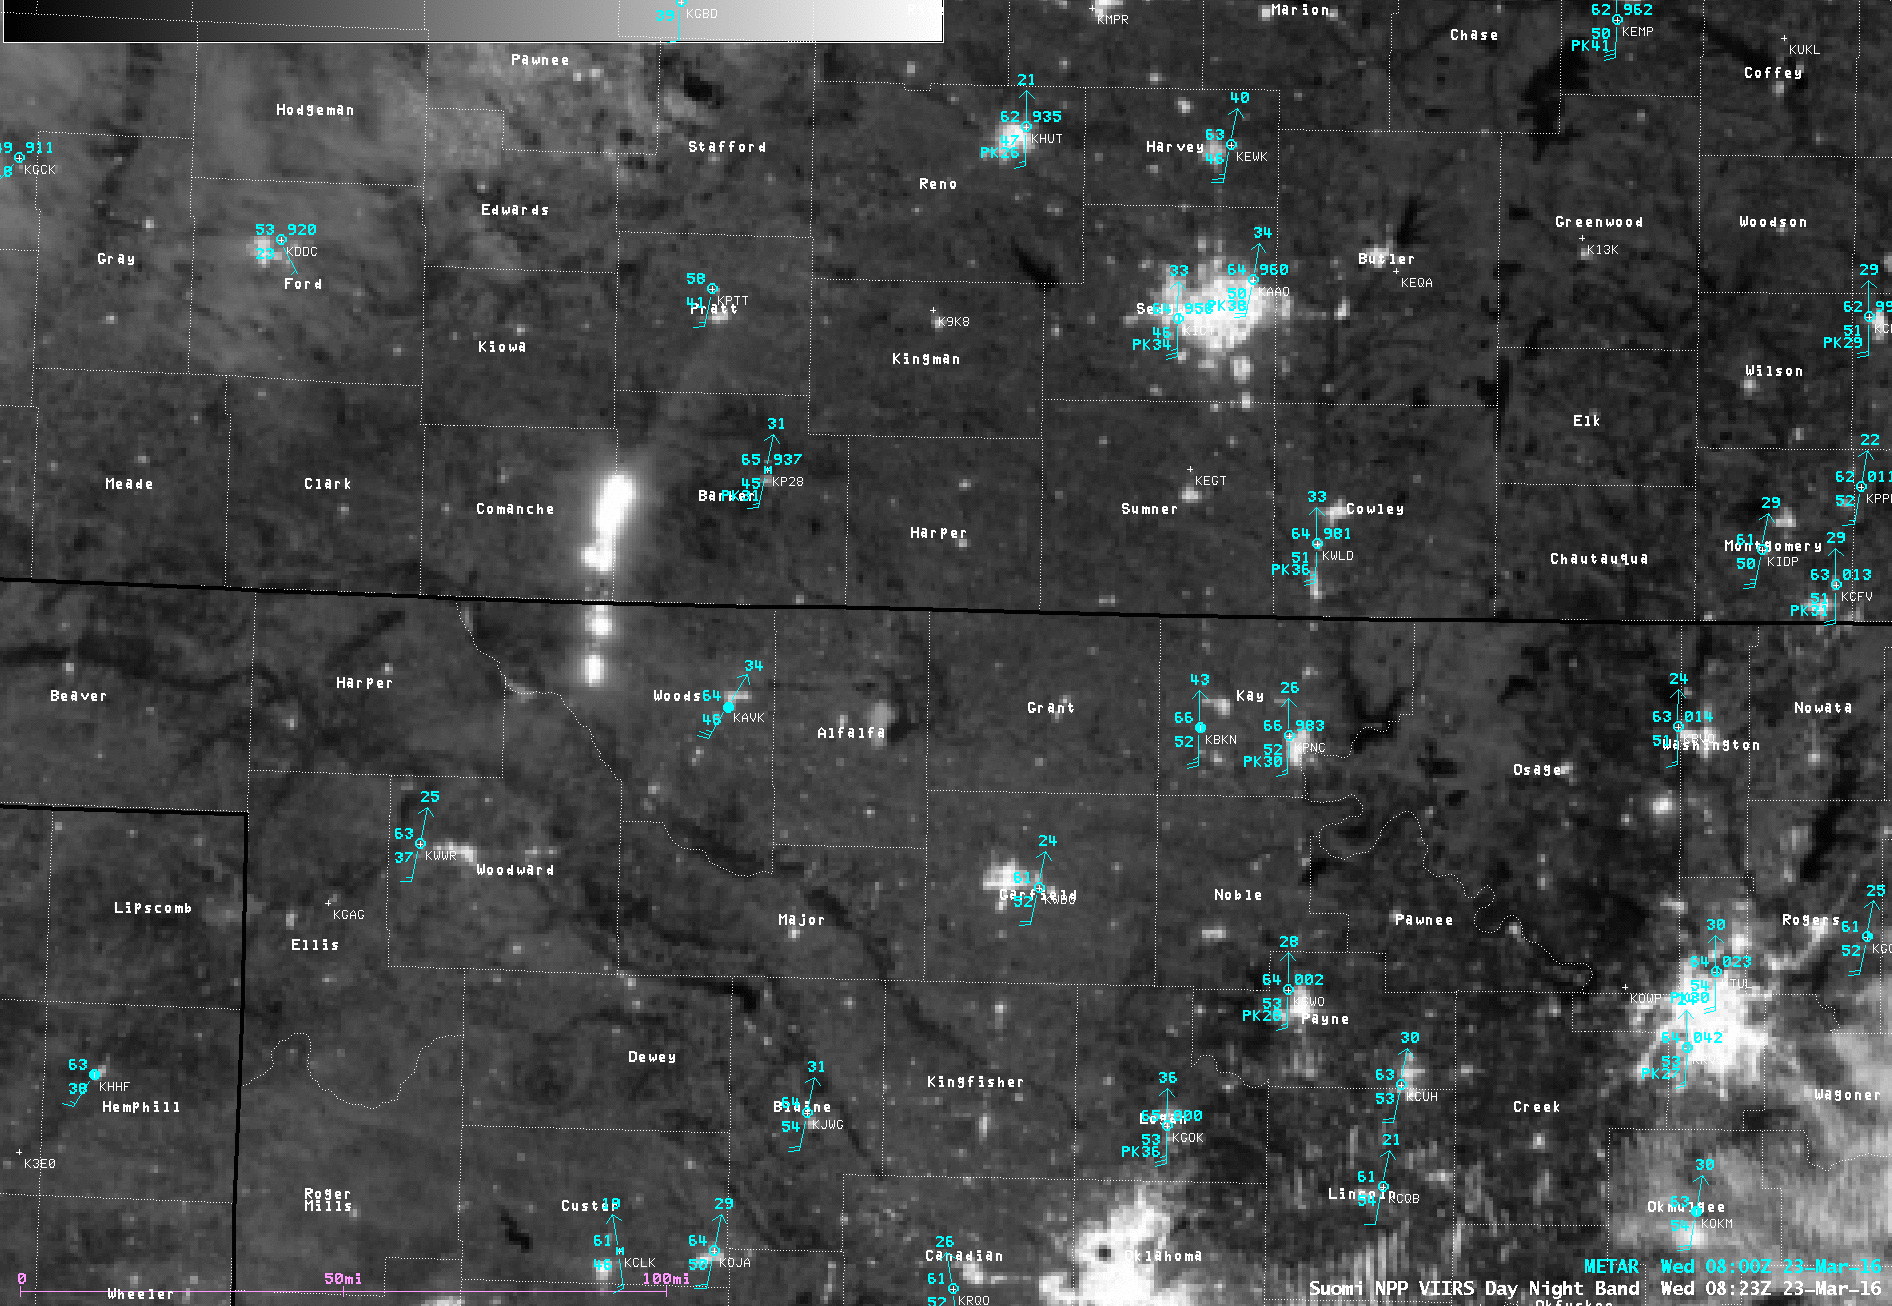 Suomi NPP VIIRS Day/Night Band (0.7 µm) and Shortwave Infrared (3.74 µm) images {click to enlarge]